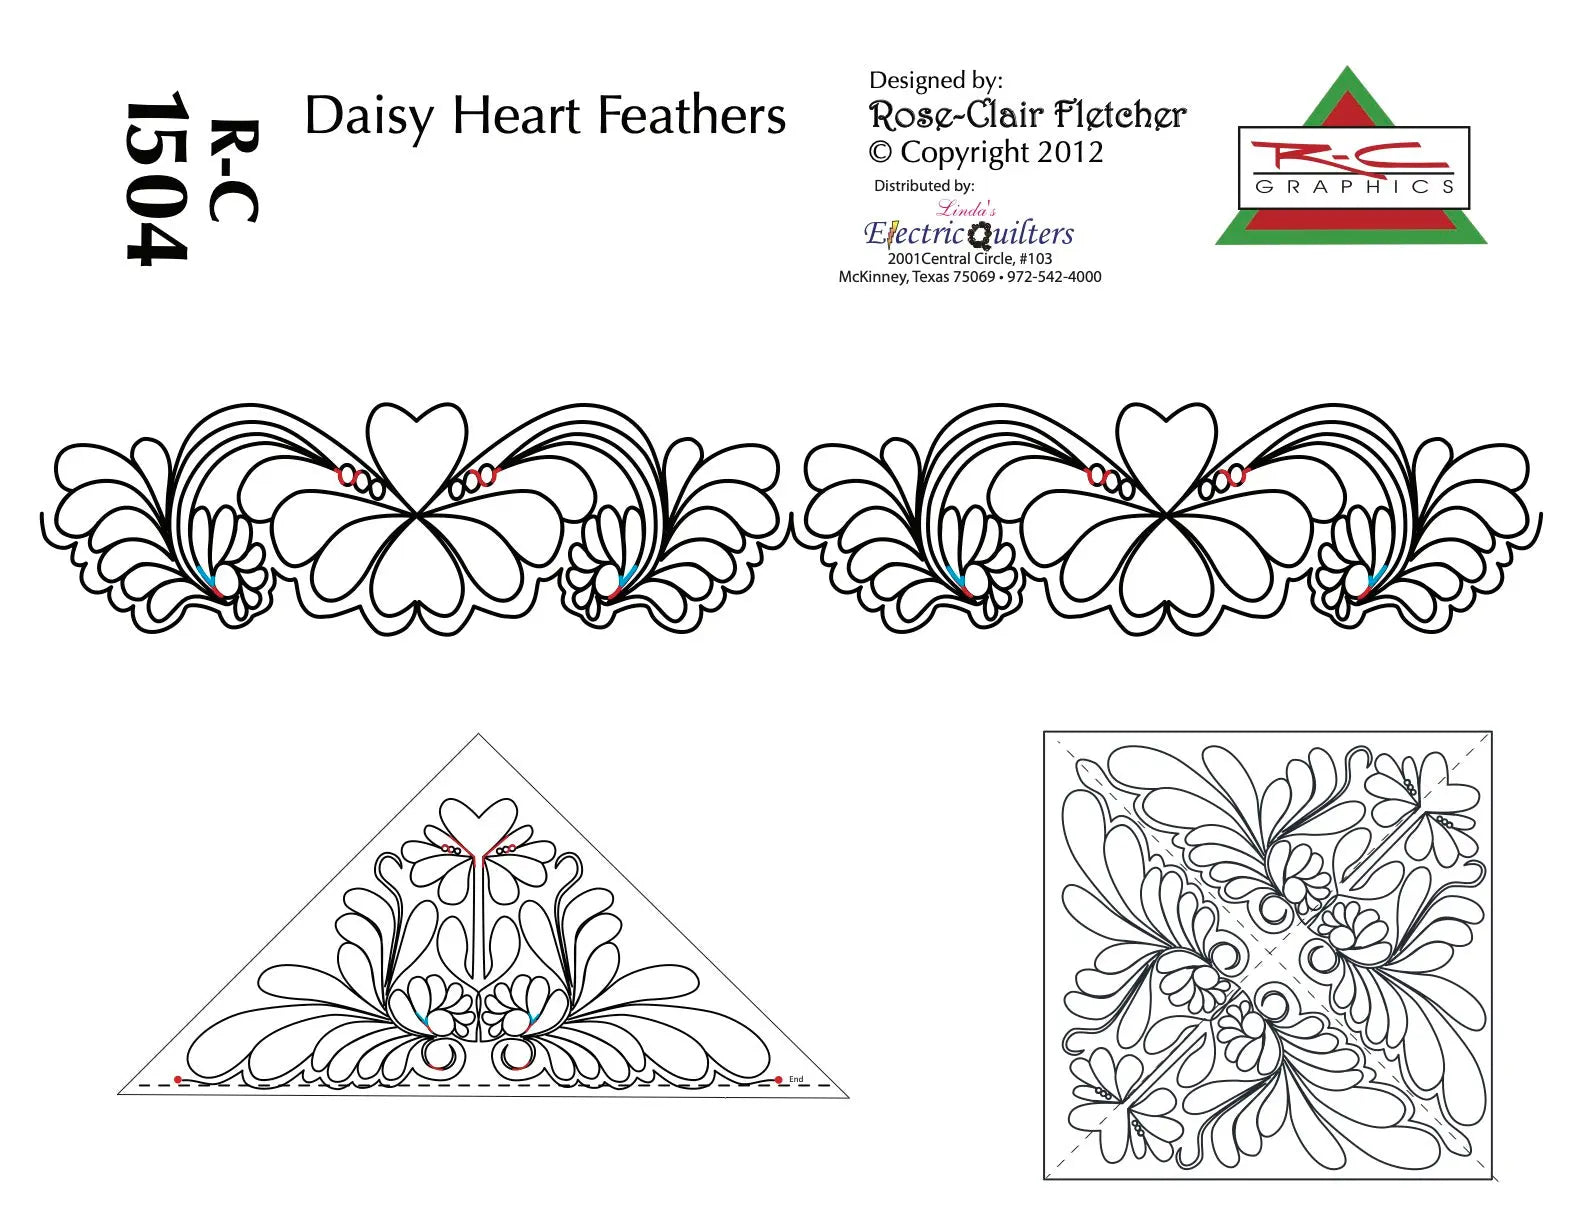 1504 Daisy Heart Feathers Pantograph And Blocks by Rose-Clair Fletcher - Linda's Electric Quilters